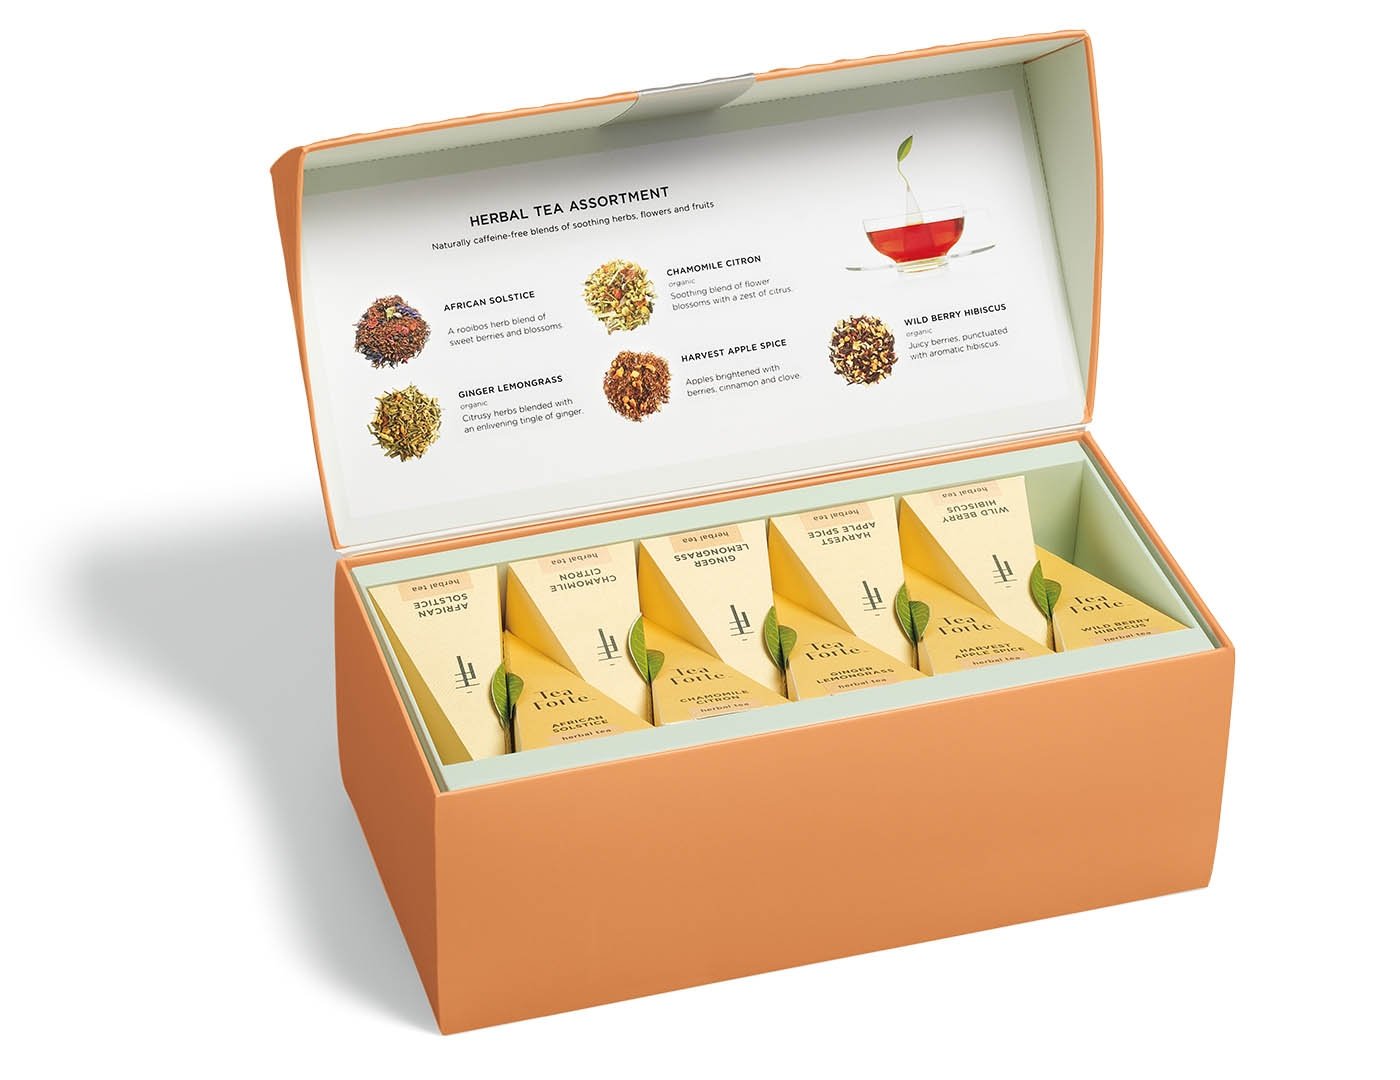 Herbal tea assortment in a 20 count presentation box with lid open